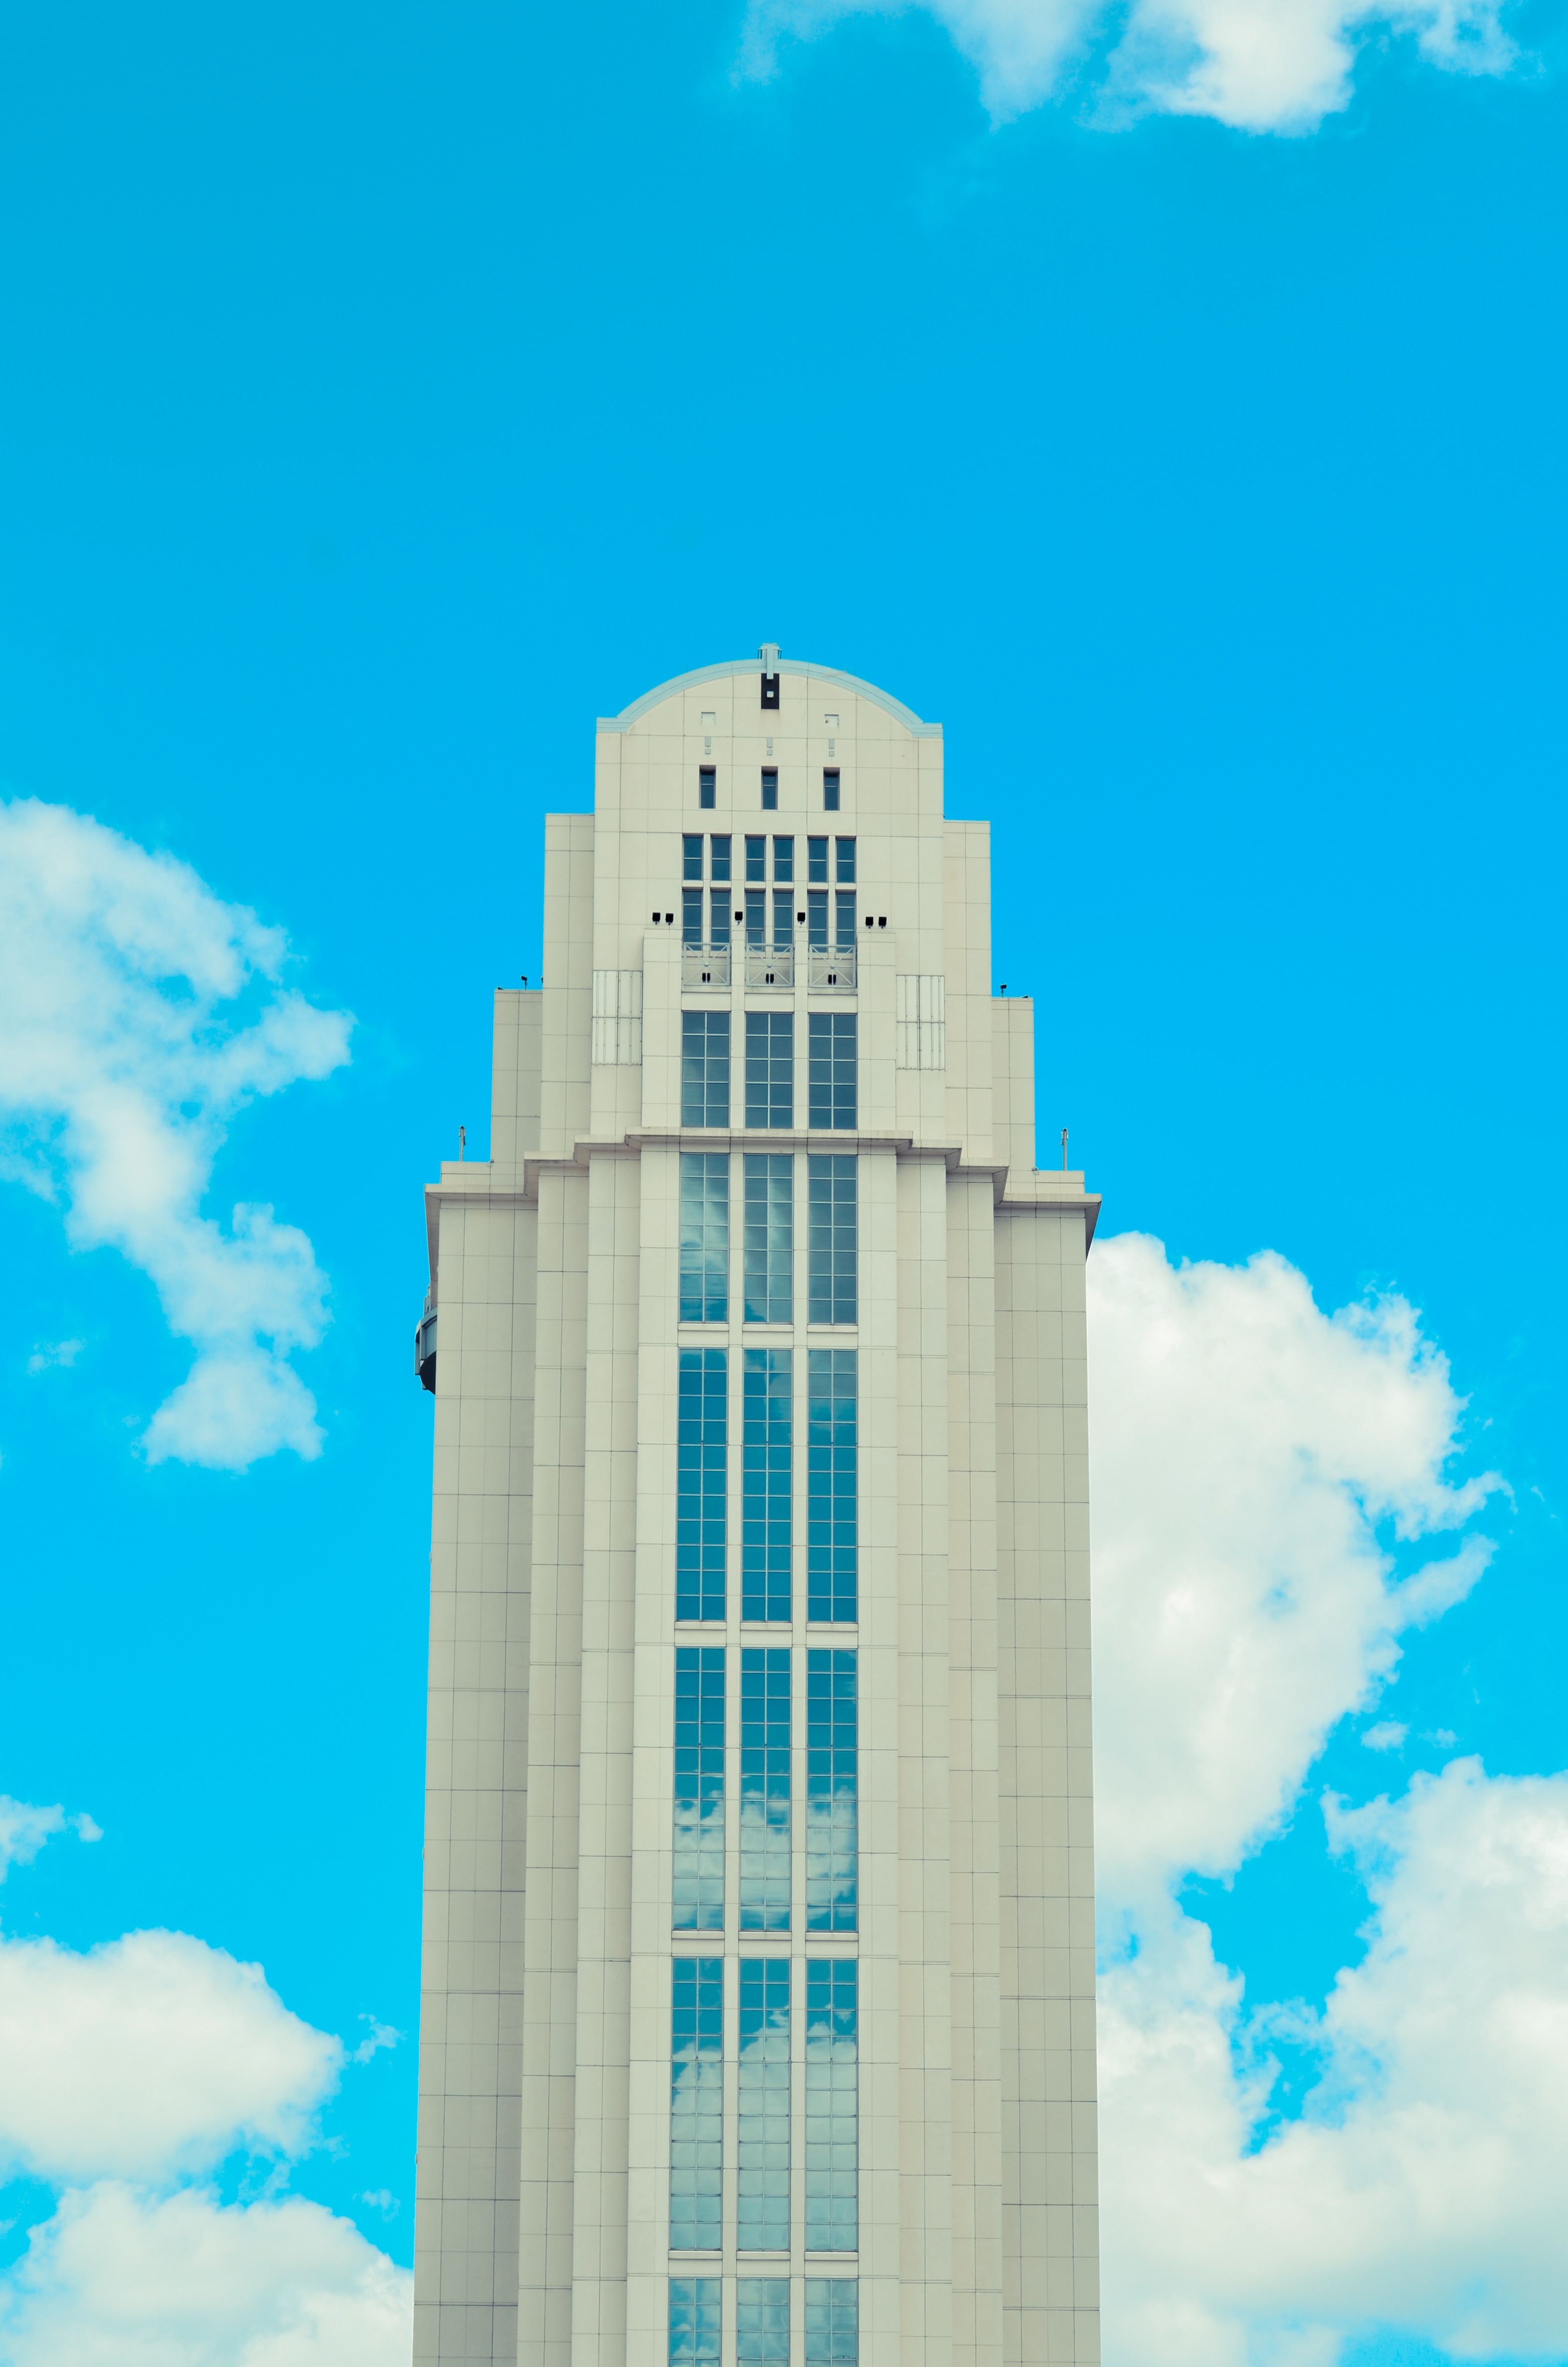 low angle view photo of white high-rise building under blue sky with cumulus clouds